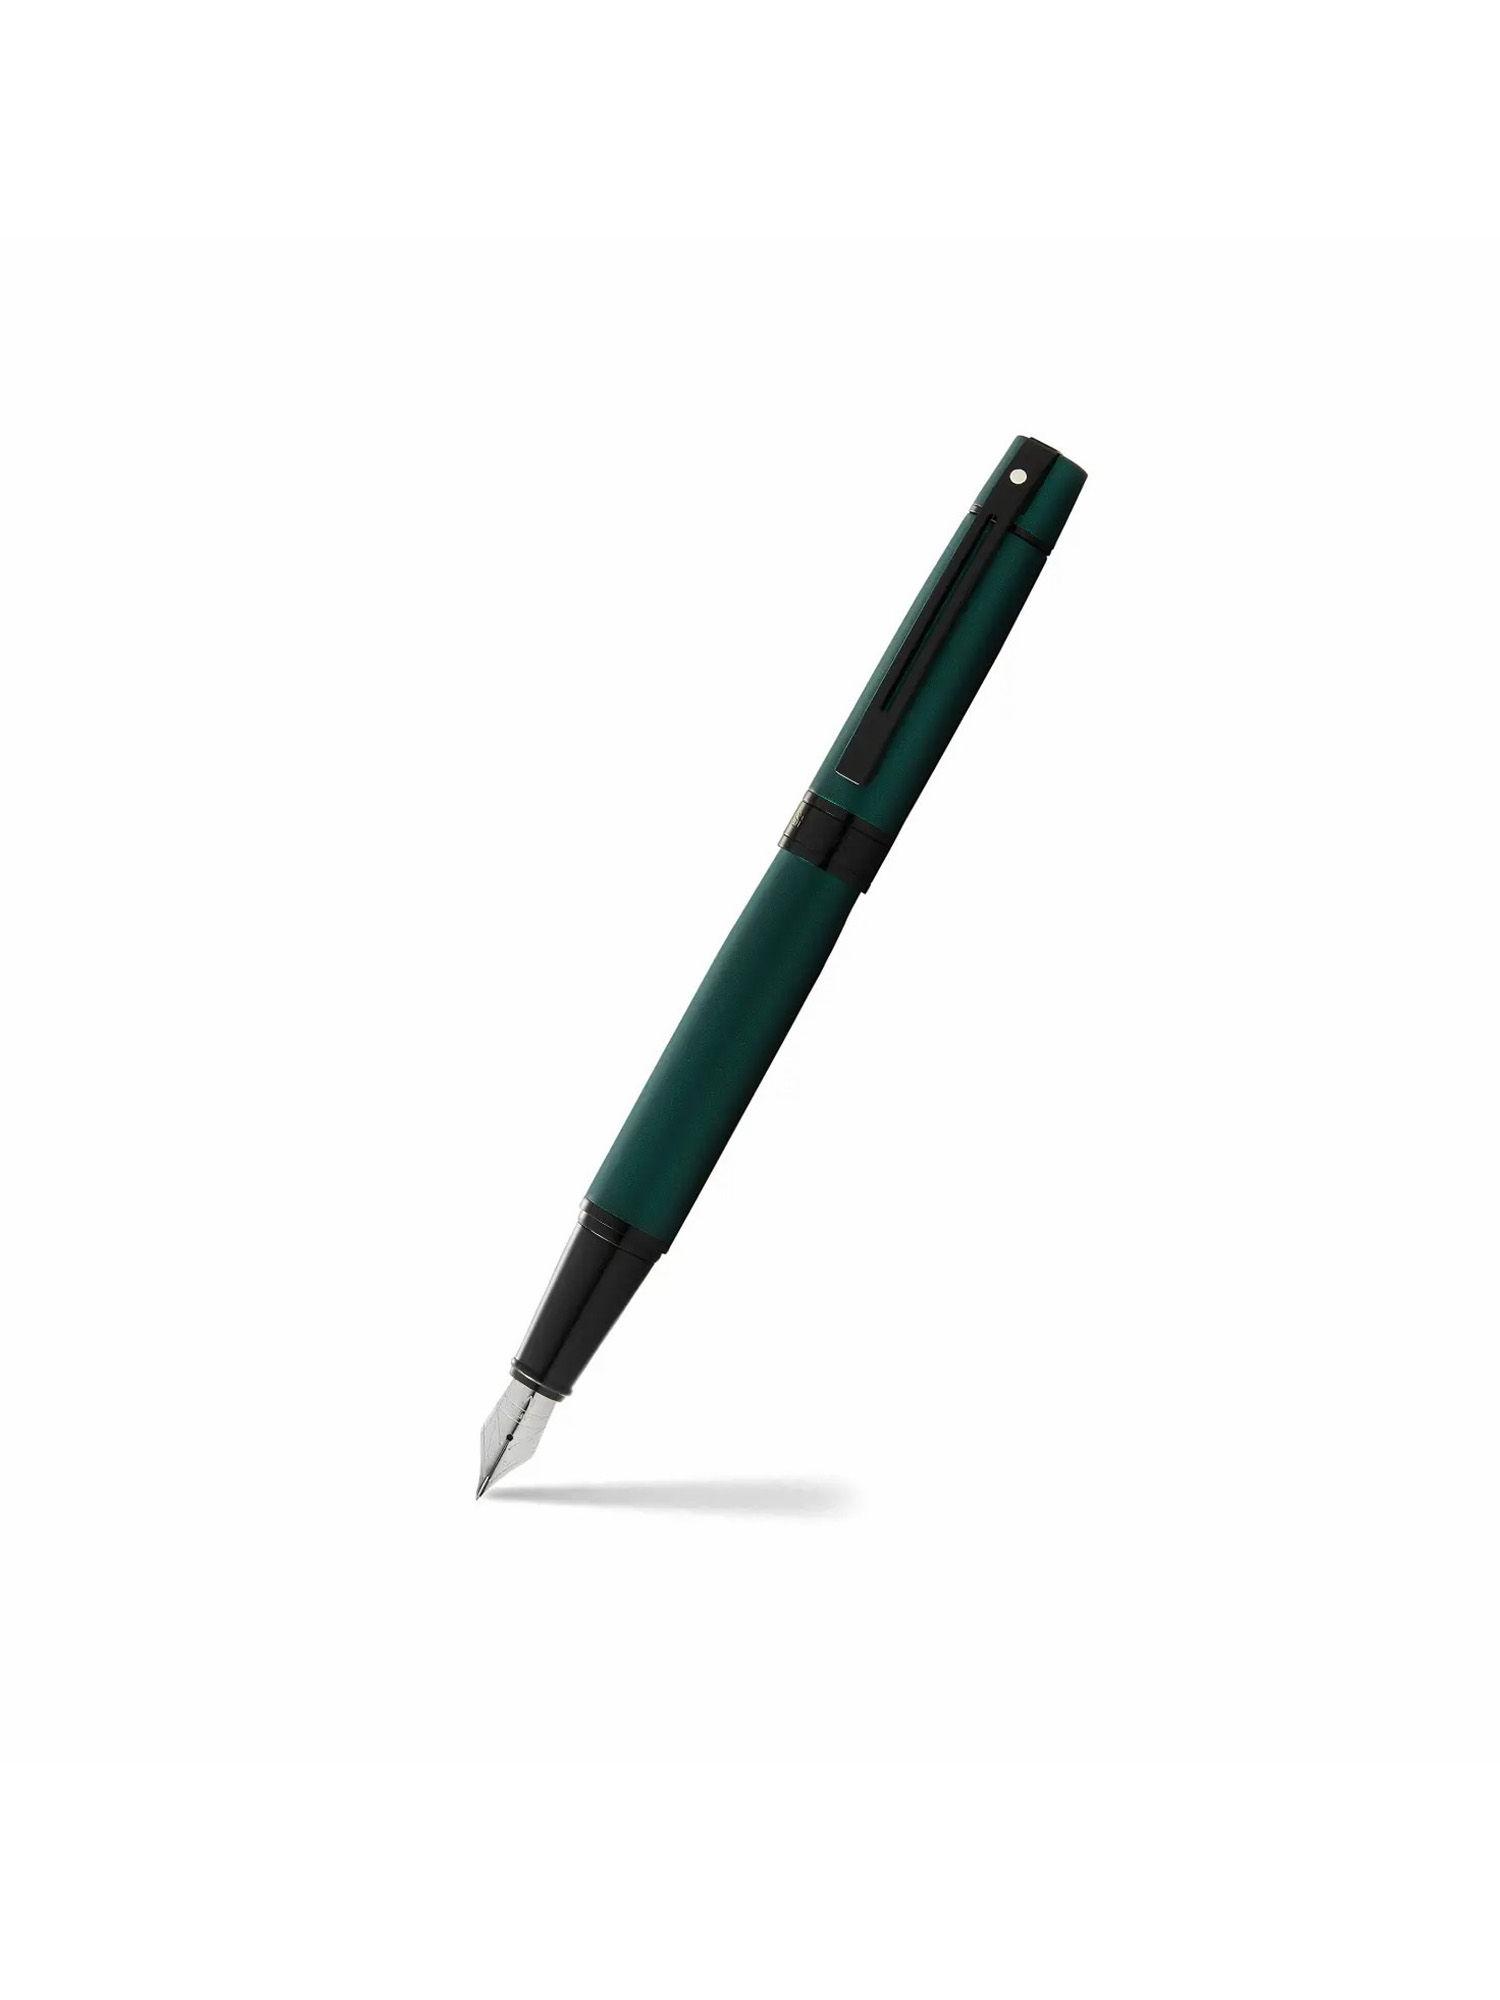 gift 300 lacquer fountain pen -fine – matte green with polished black trim